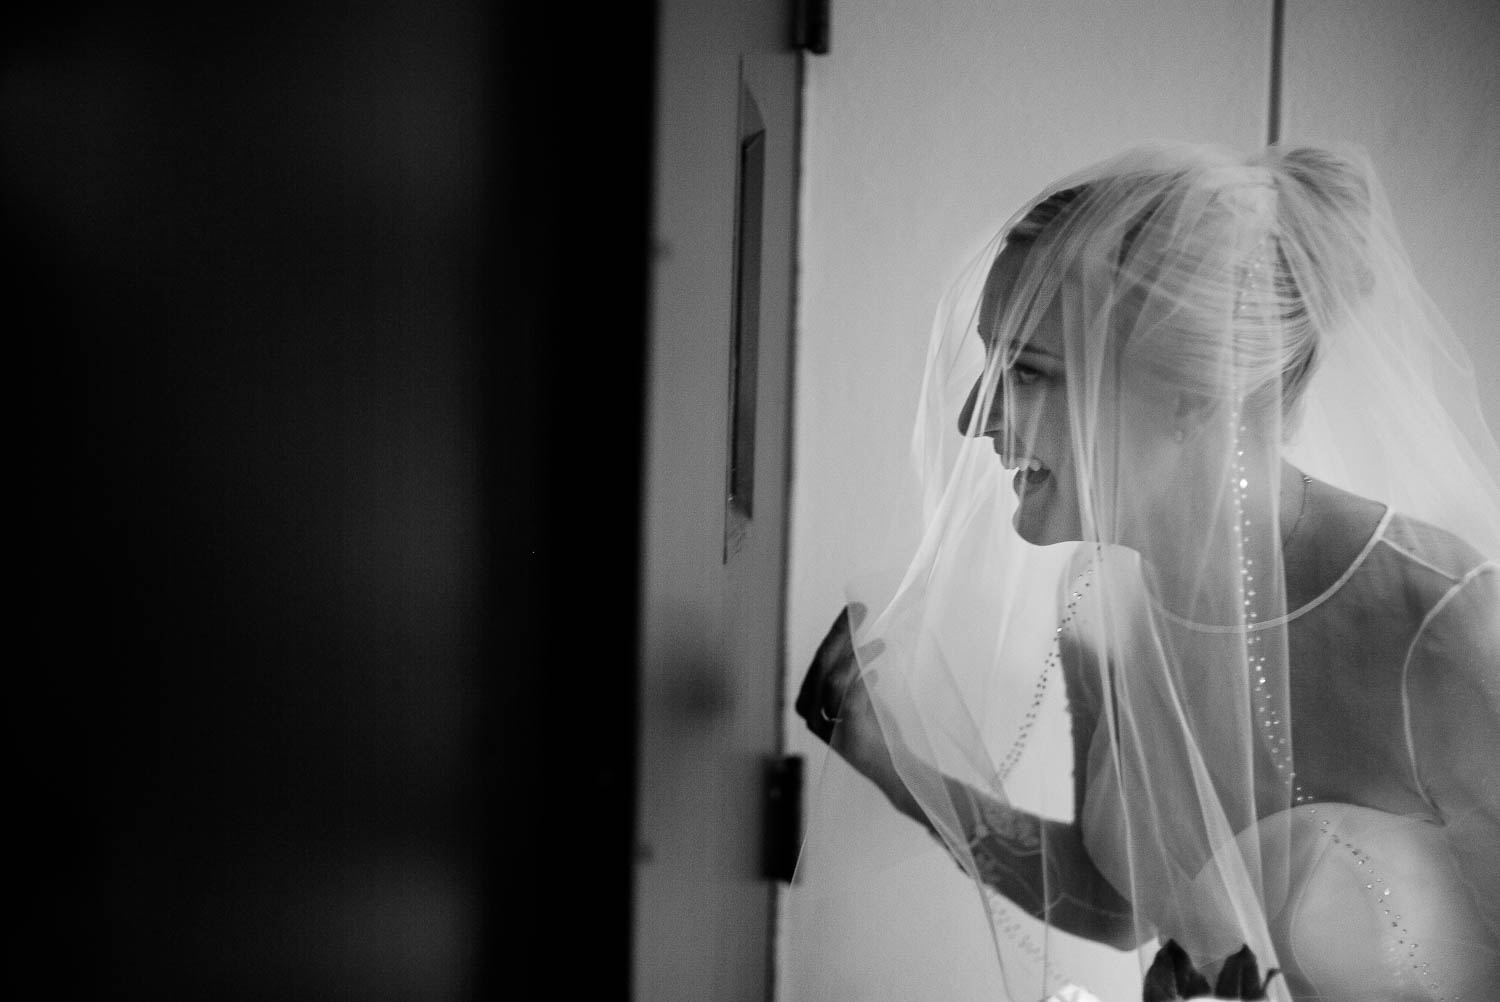 Moments before her ceremony, bride peeks through a door window at the groom waiting. Photographed at United Methodist Church, Houston Texas.